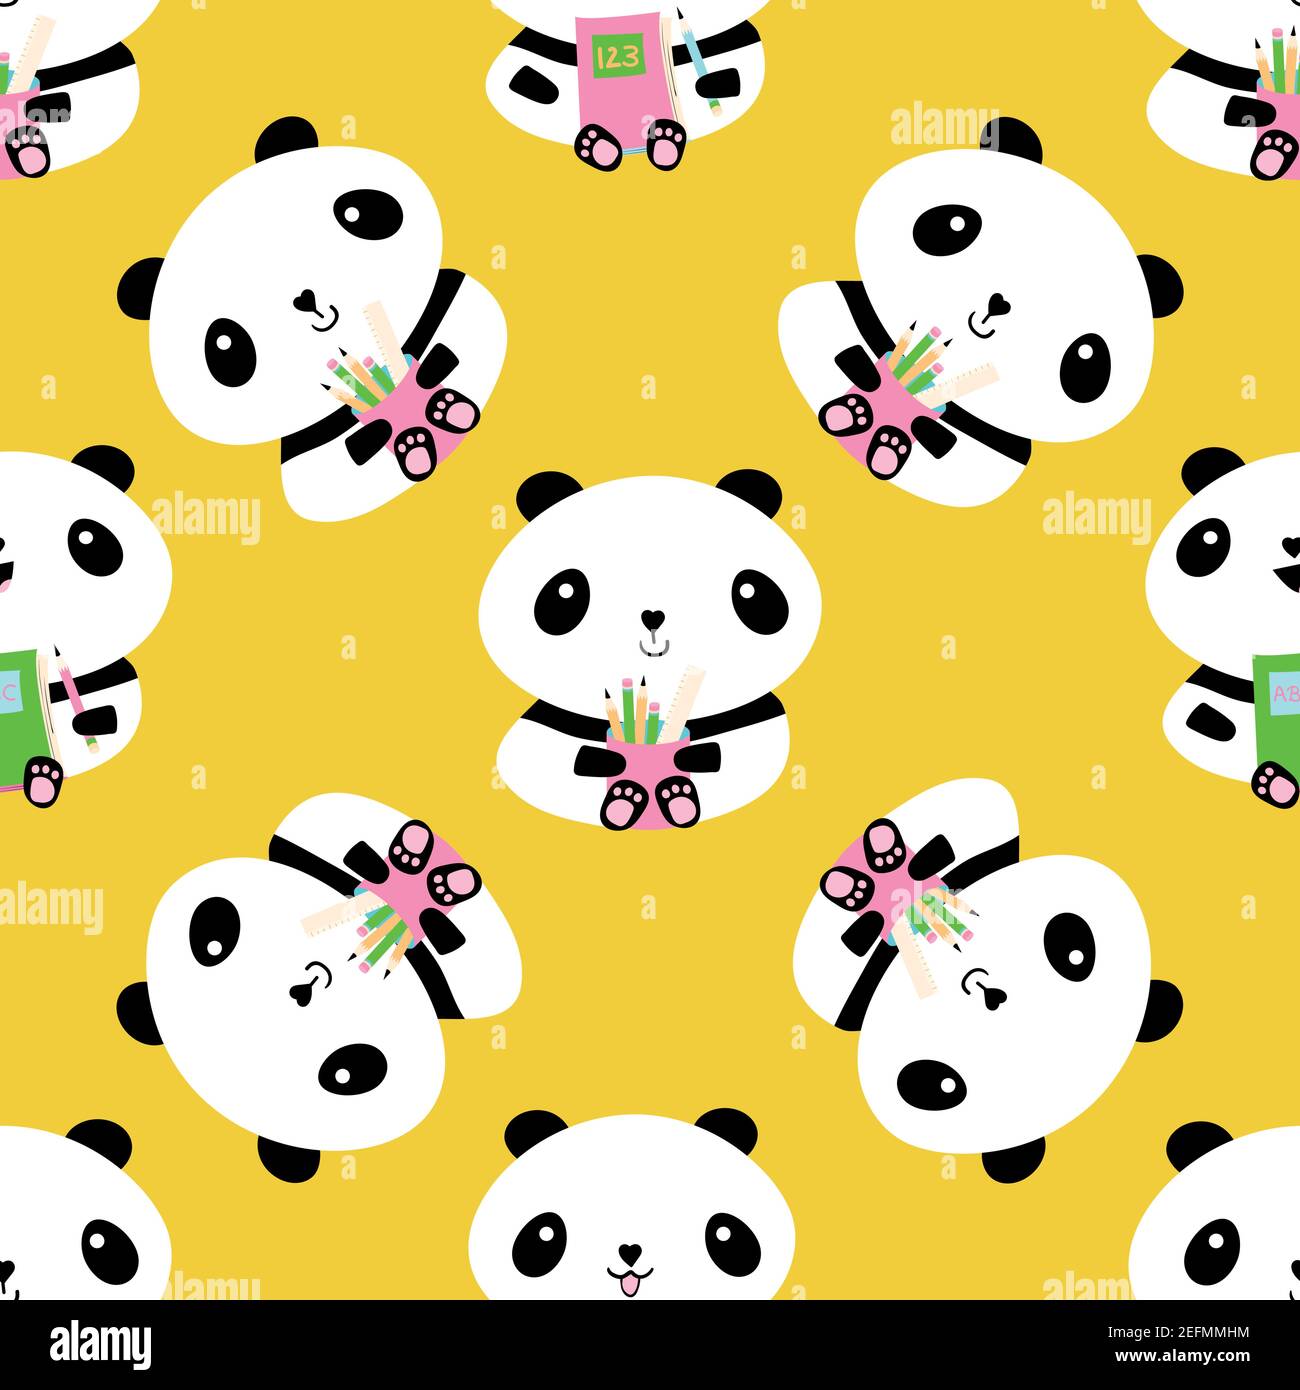 Cute Kawaii vector panda seamless pattern background. Sitting cartoon bears holding pencil holders and notebooks on yellow backdrop. Fun character Stock Vector